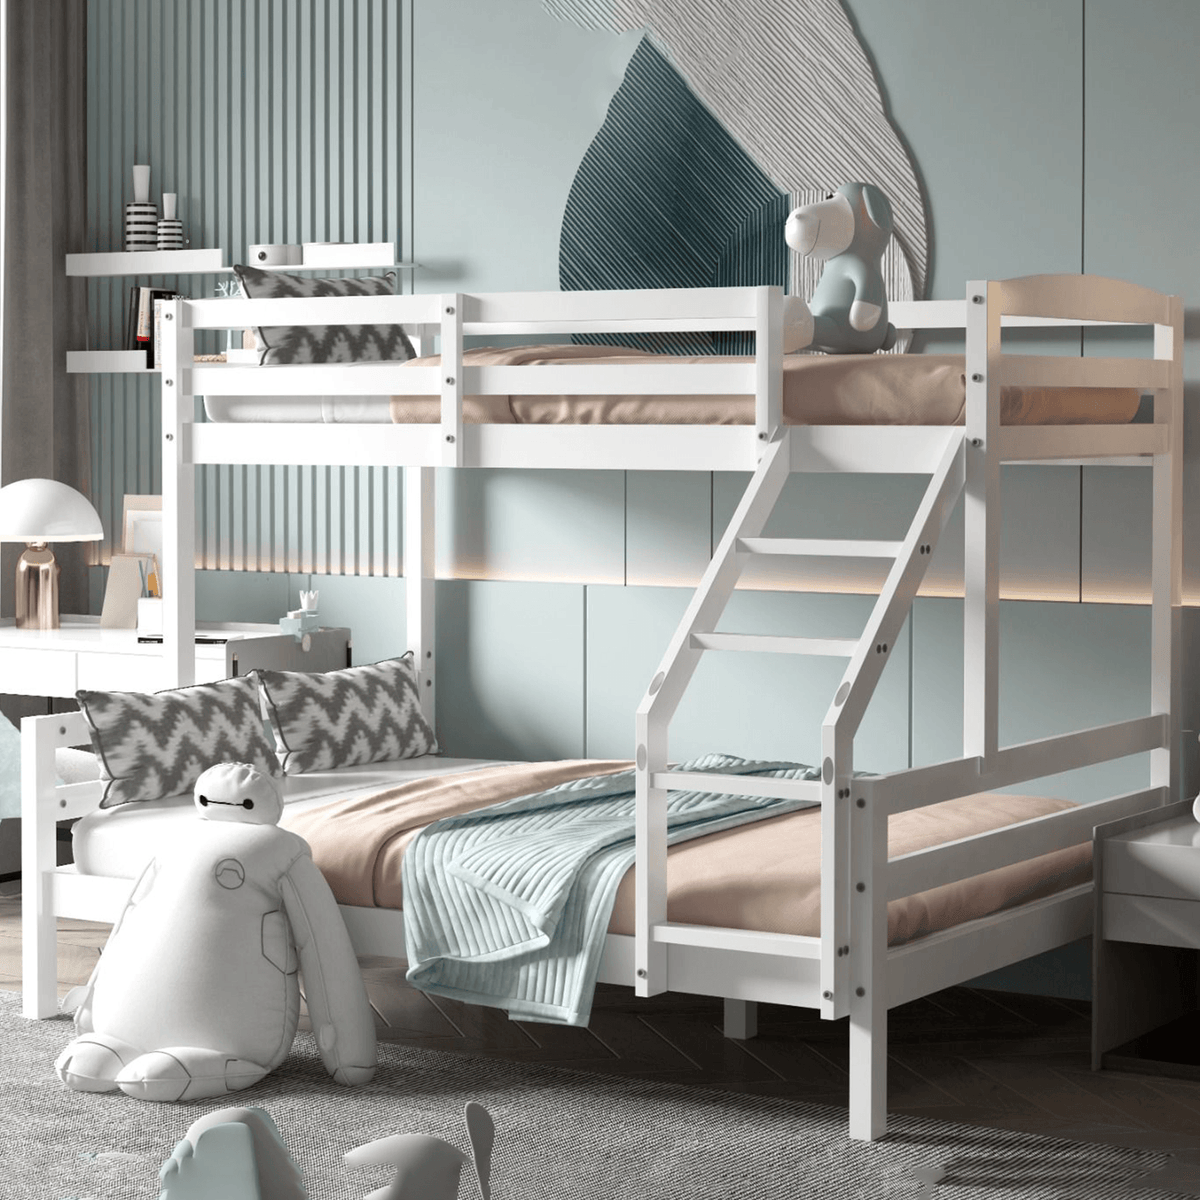 Hopin Triple Bunk Bed Frame in White